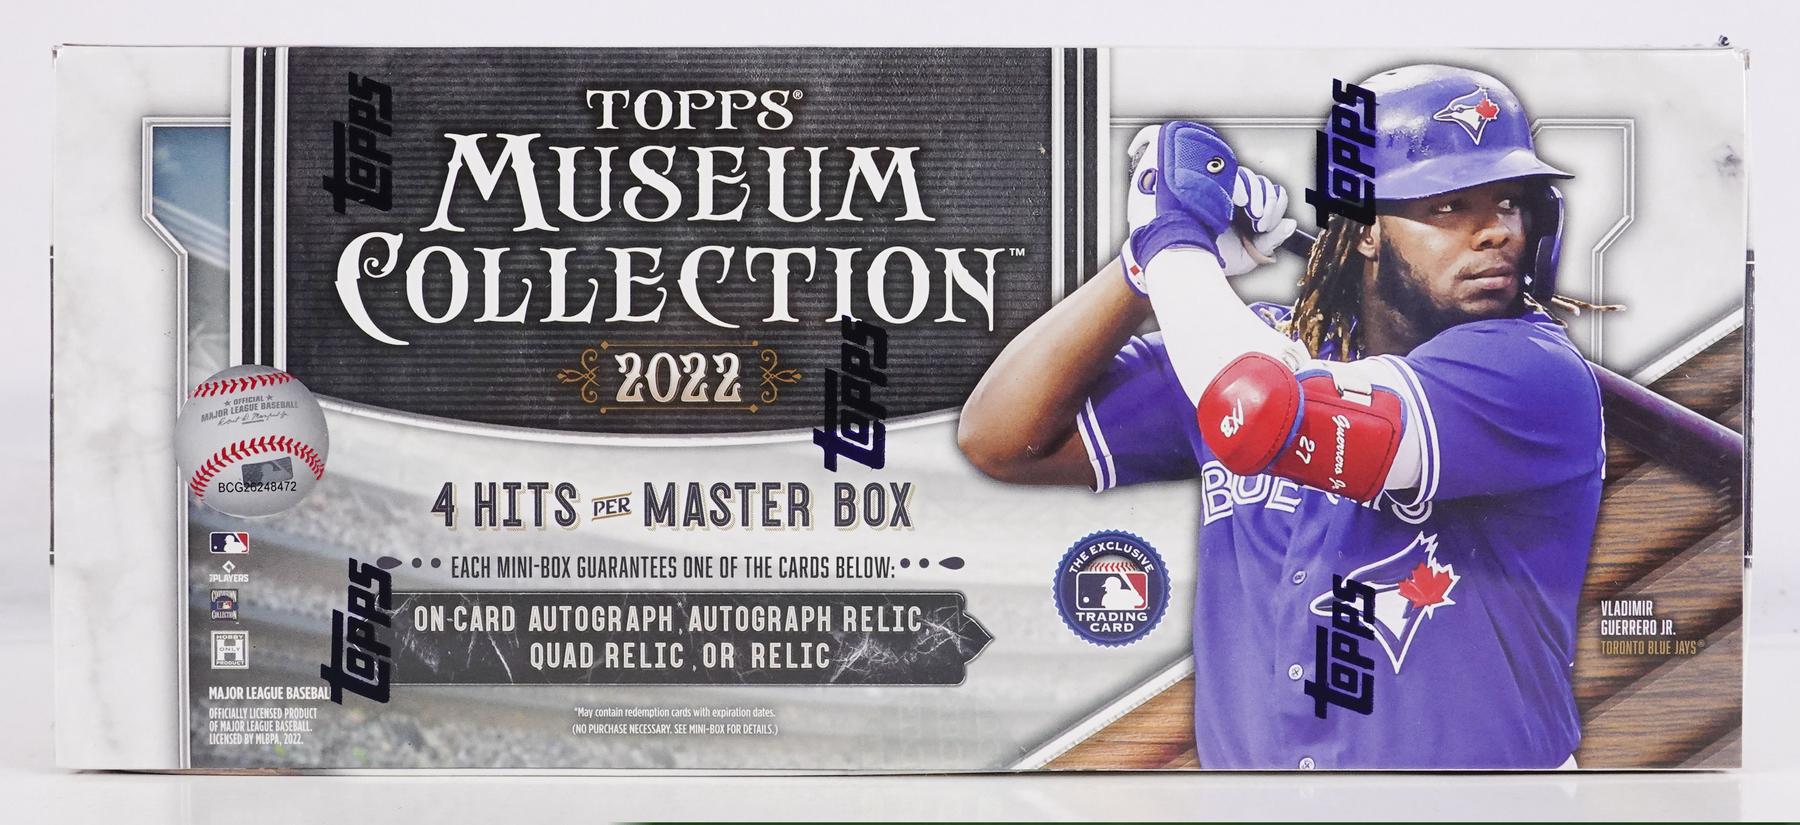 2023 Topps Museum Collection Baseball Checklist, Team Sets, Box